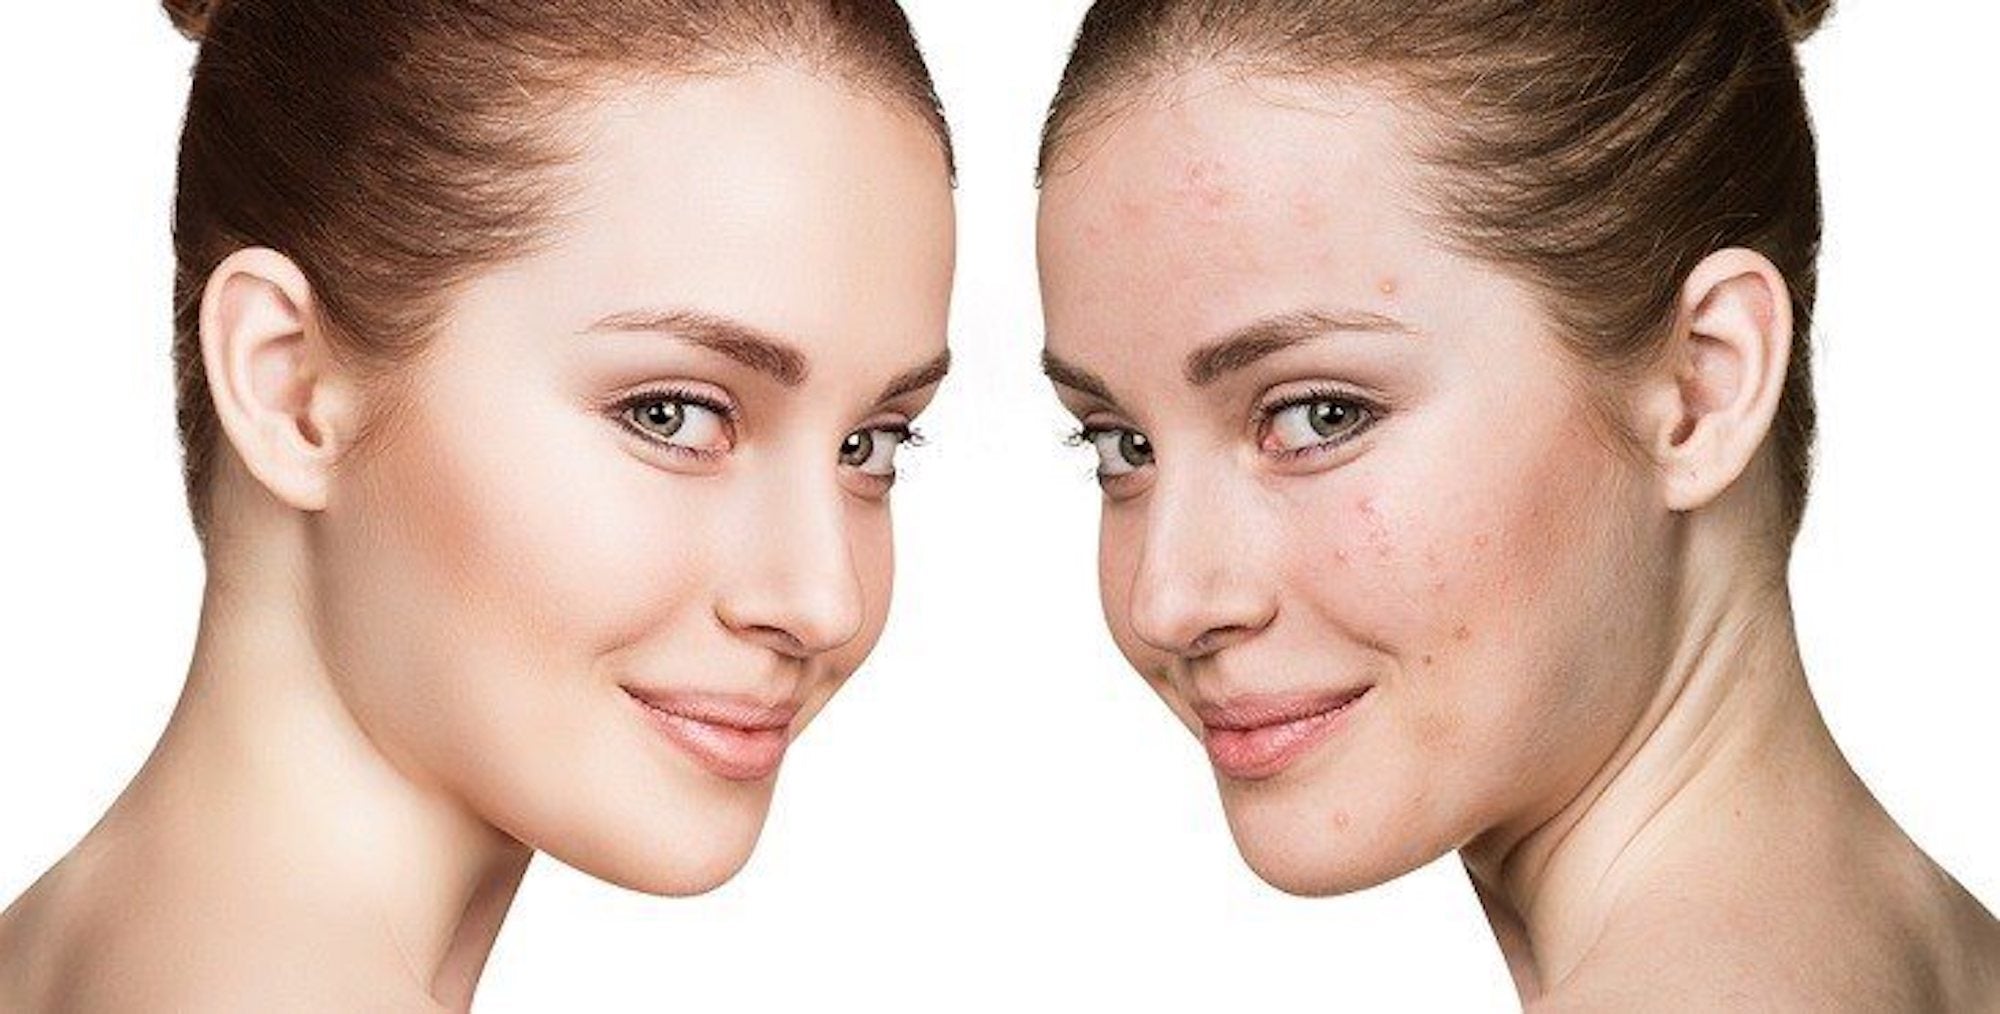 Acne-Prone Skin Care 8 Essential Products